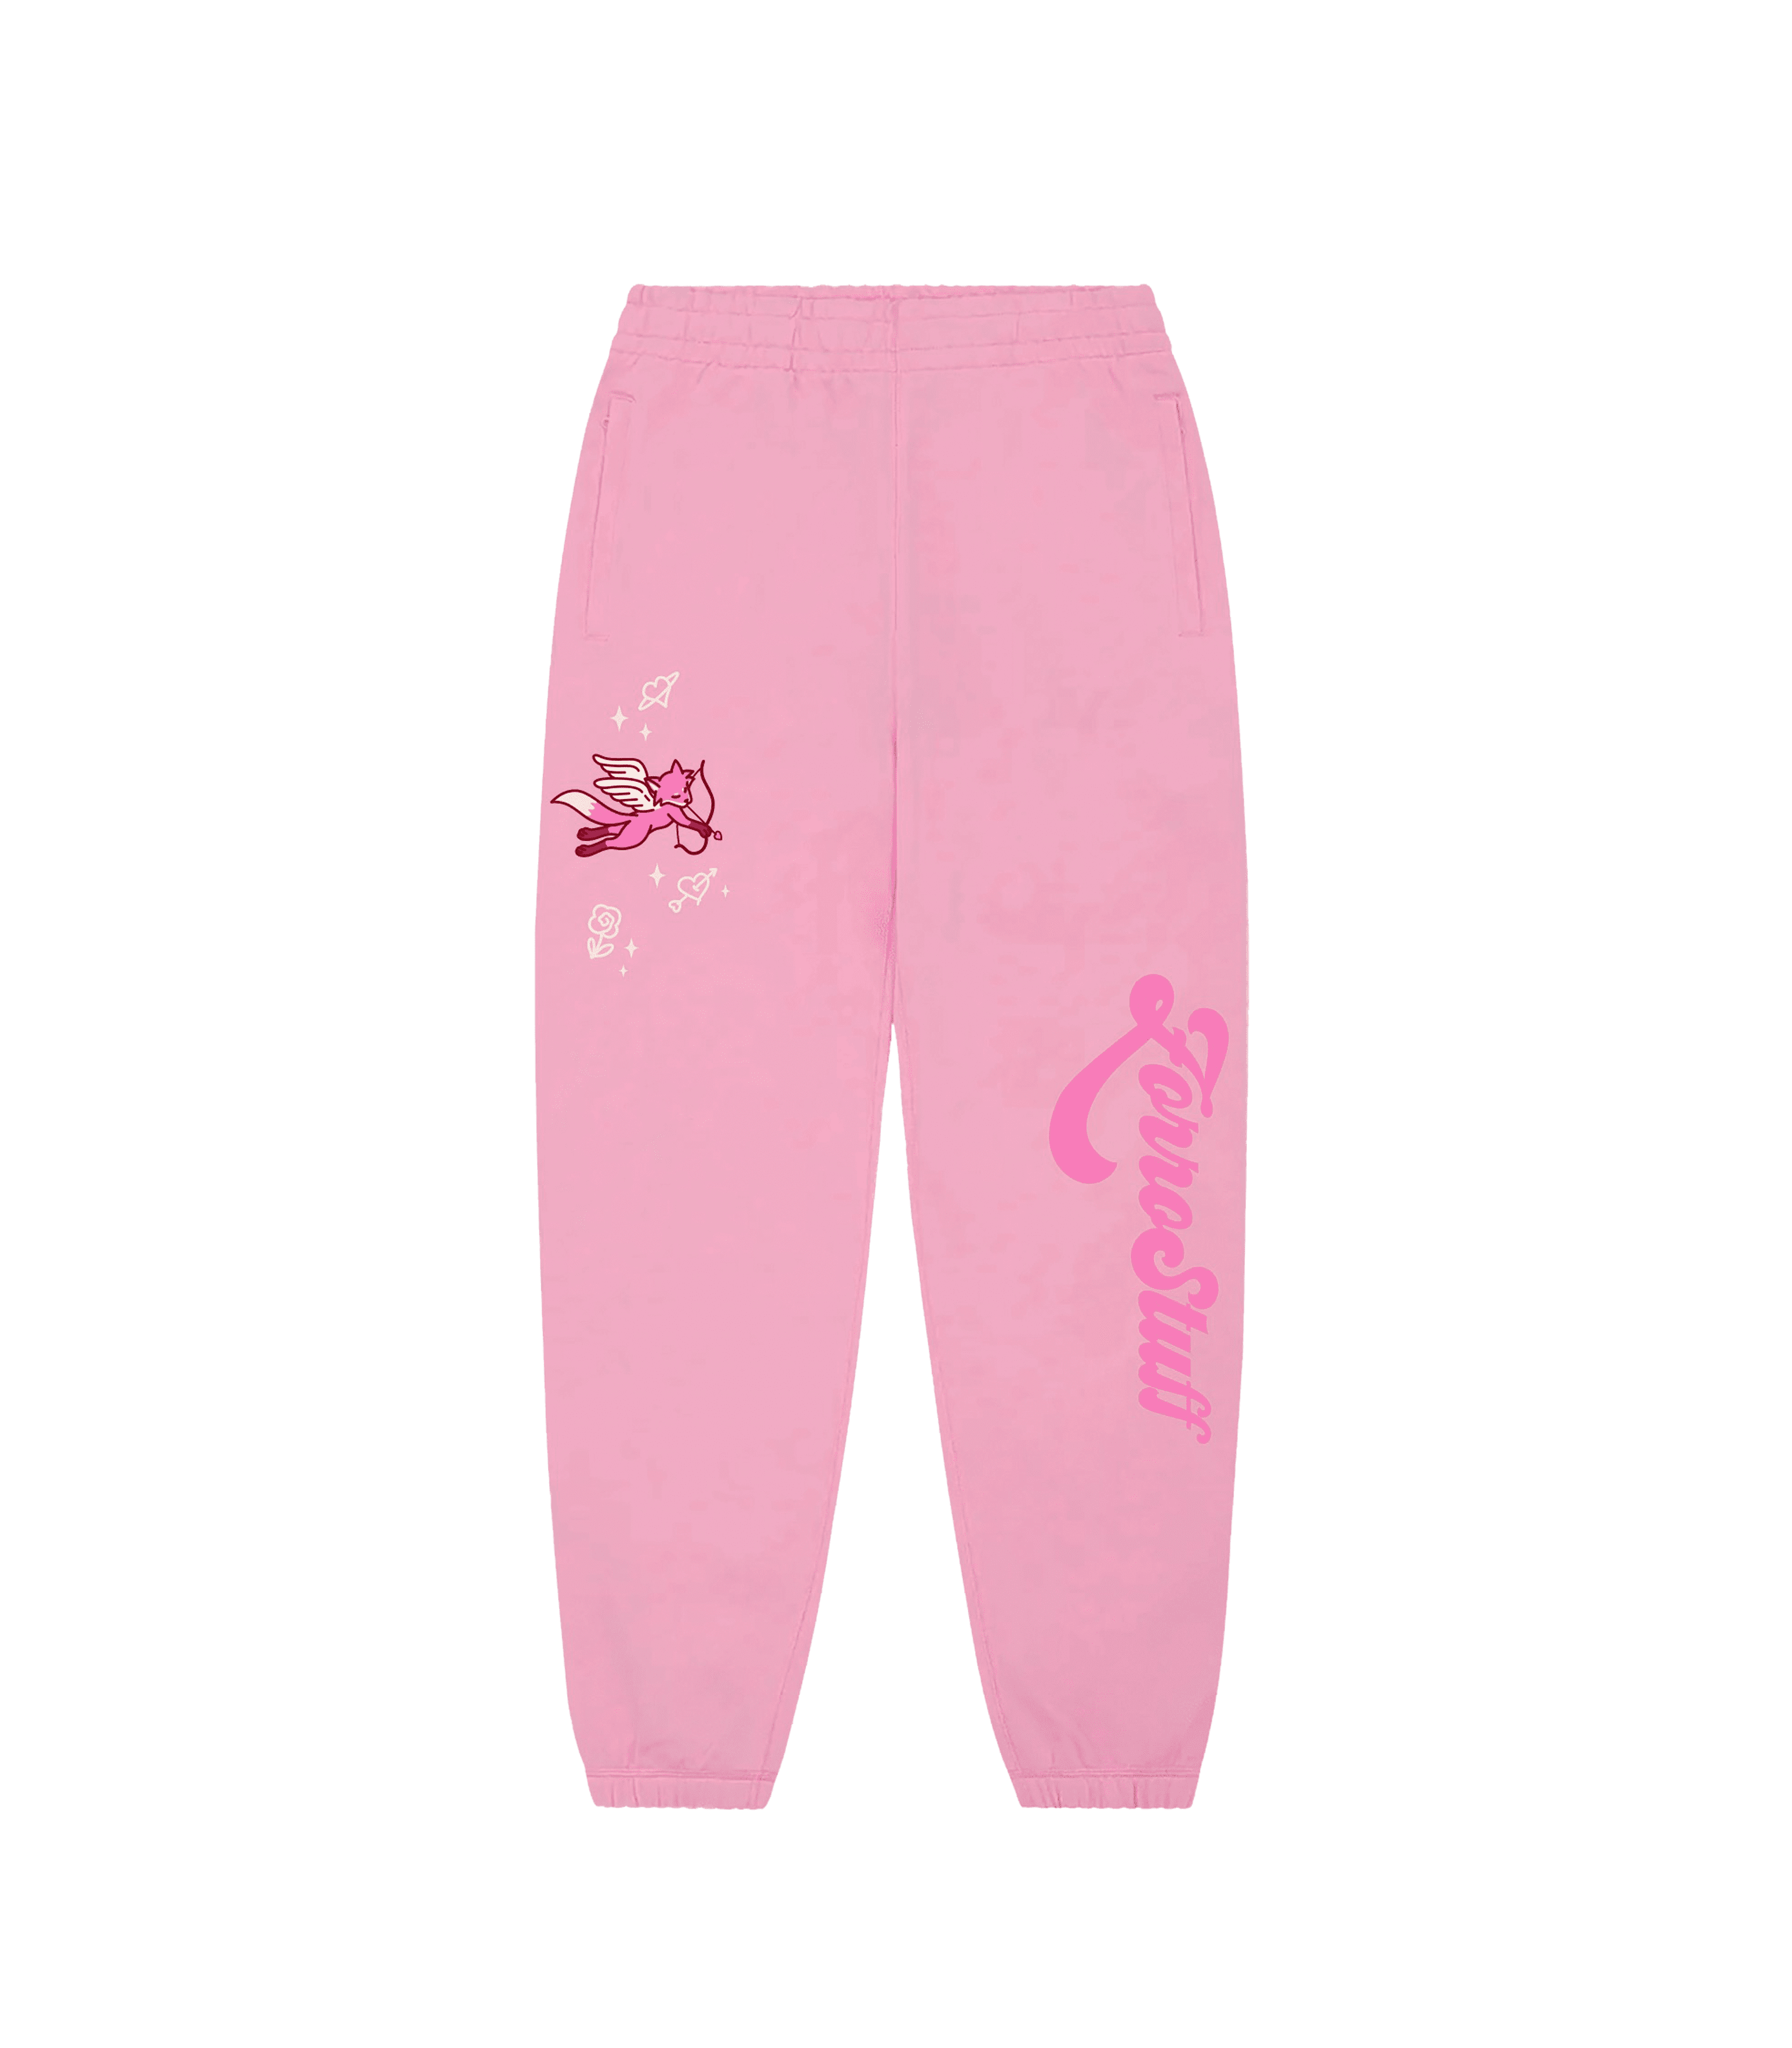 Zorro Stuff Joggers Fall in Love with your Dreams Jogger Pink